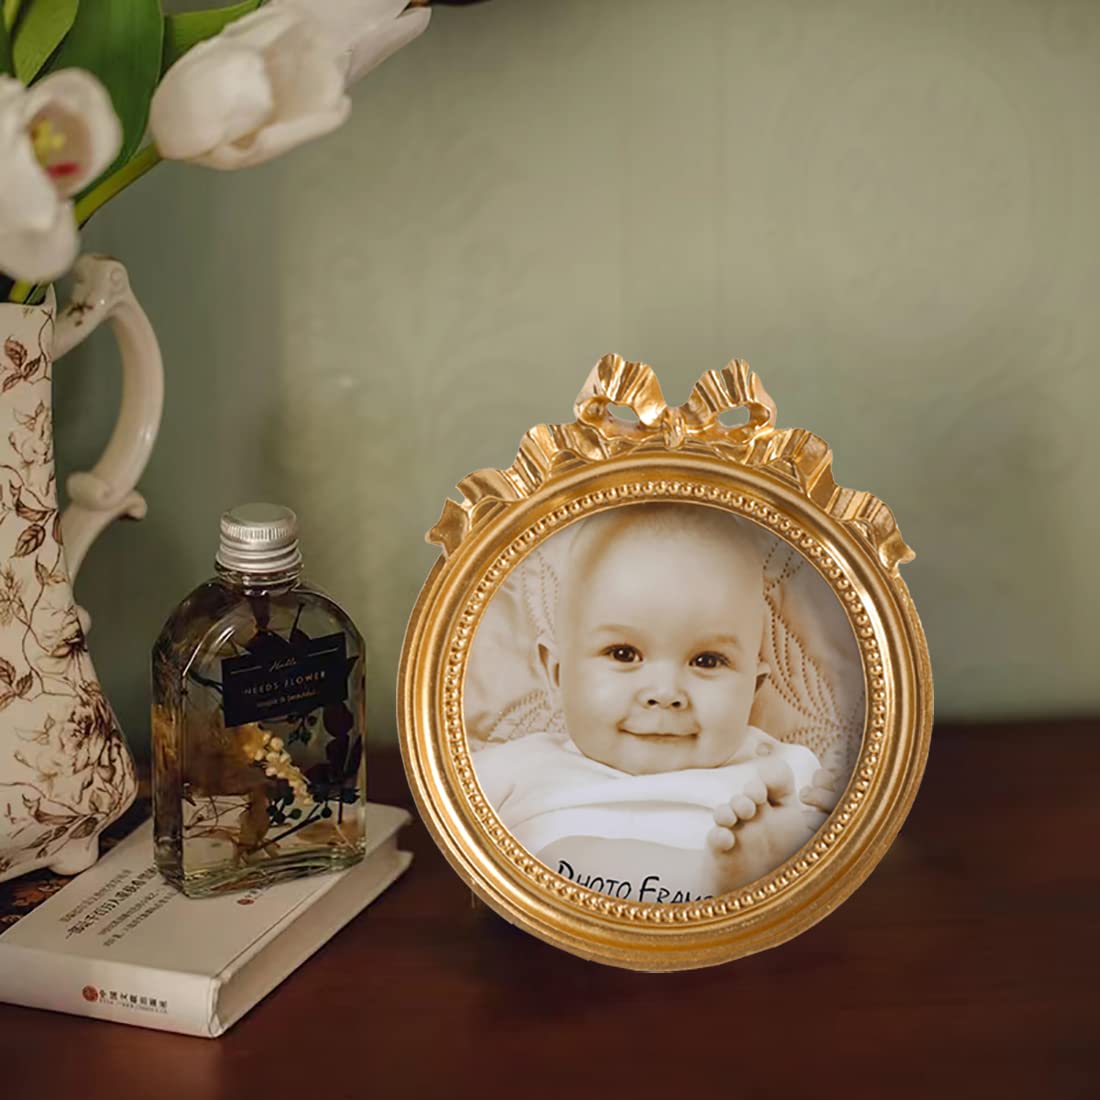 Kangce Picture Frames 3.5x3.5 Vintage Picture Frames Round Picture Frames Small Gold Picture Frames Wallet Size Picture Frames Ornate Picture Frames Antique Wall Decor with Embossed Beaded